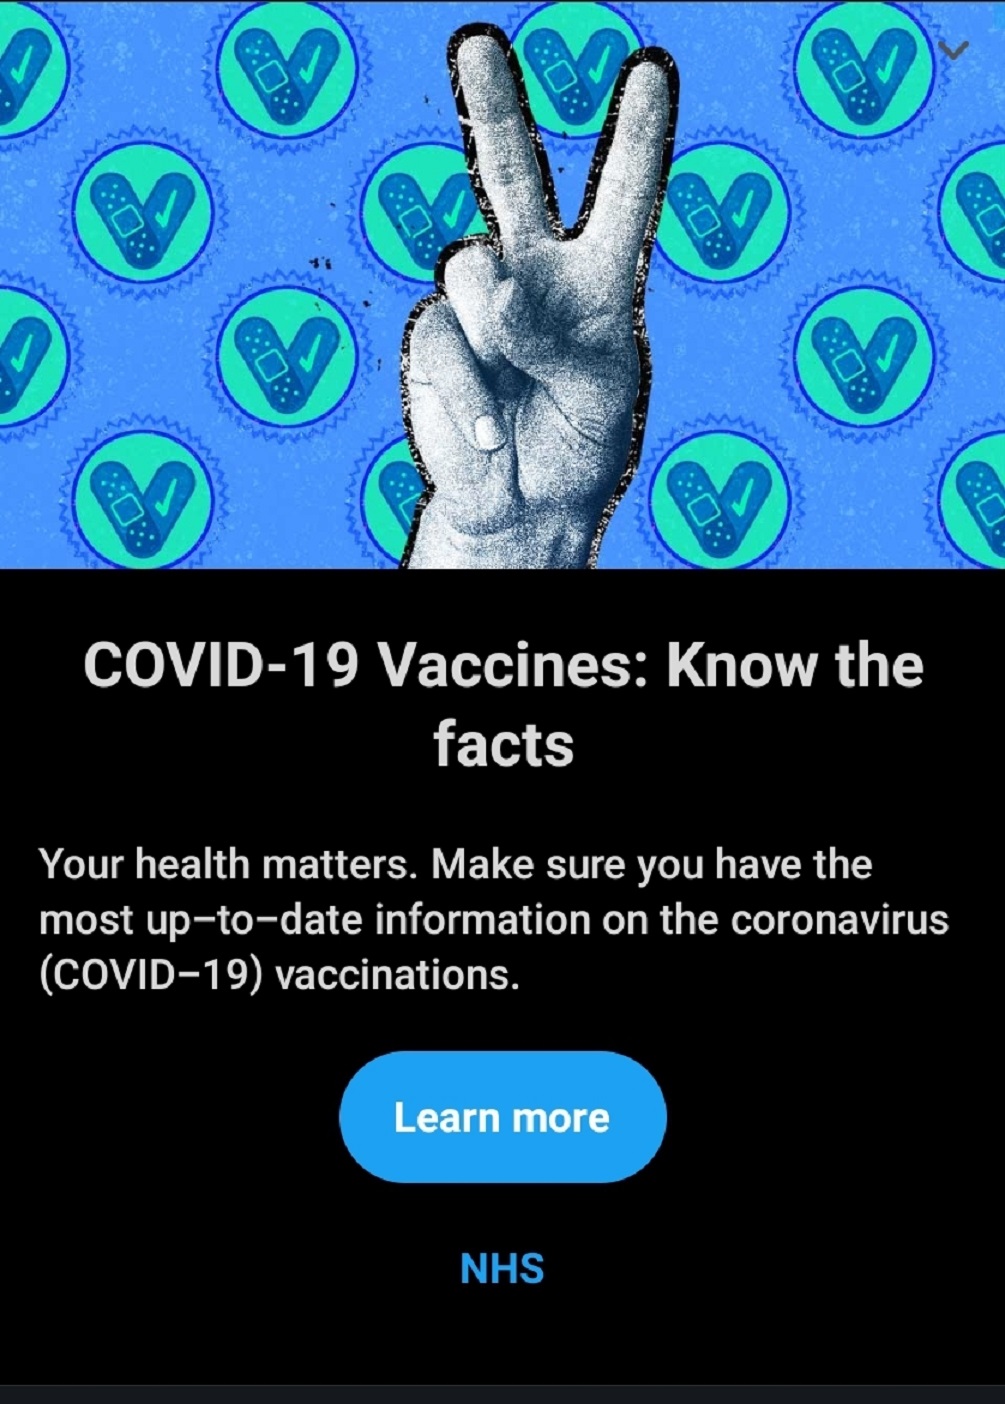 A screenshot of Twitter's new banner alerts about Covid-19 vaccines